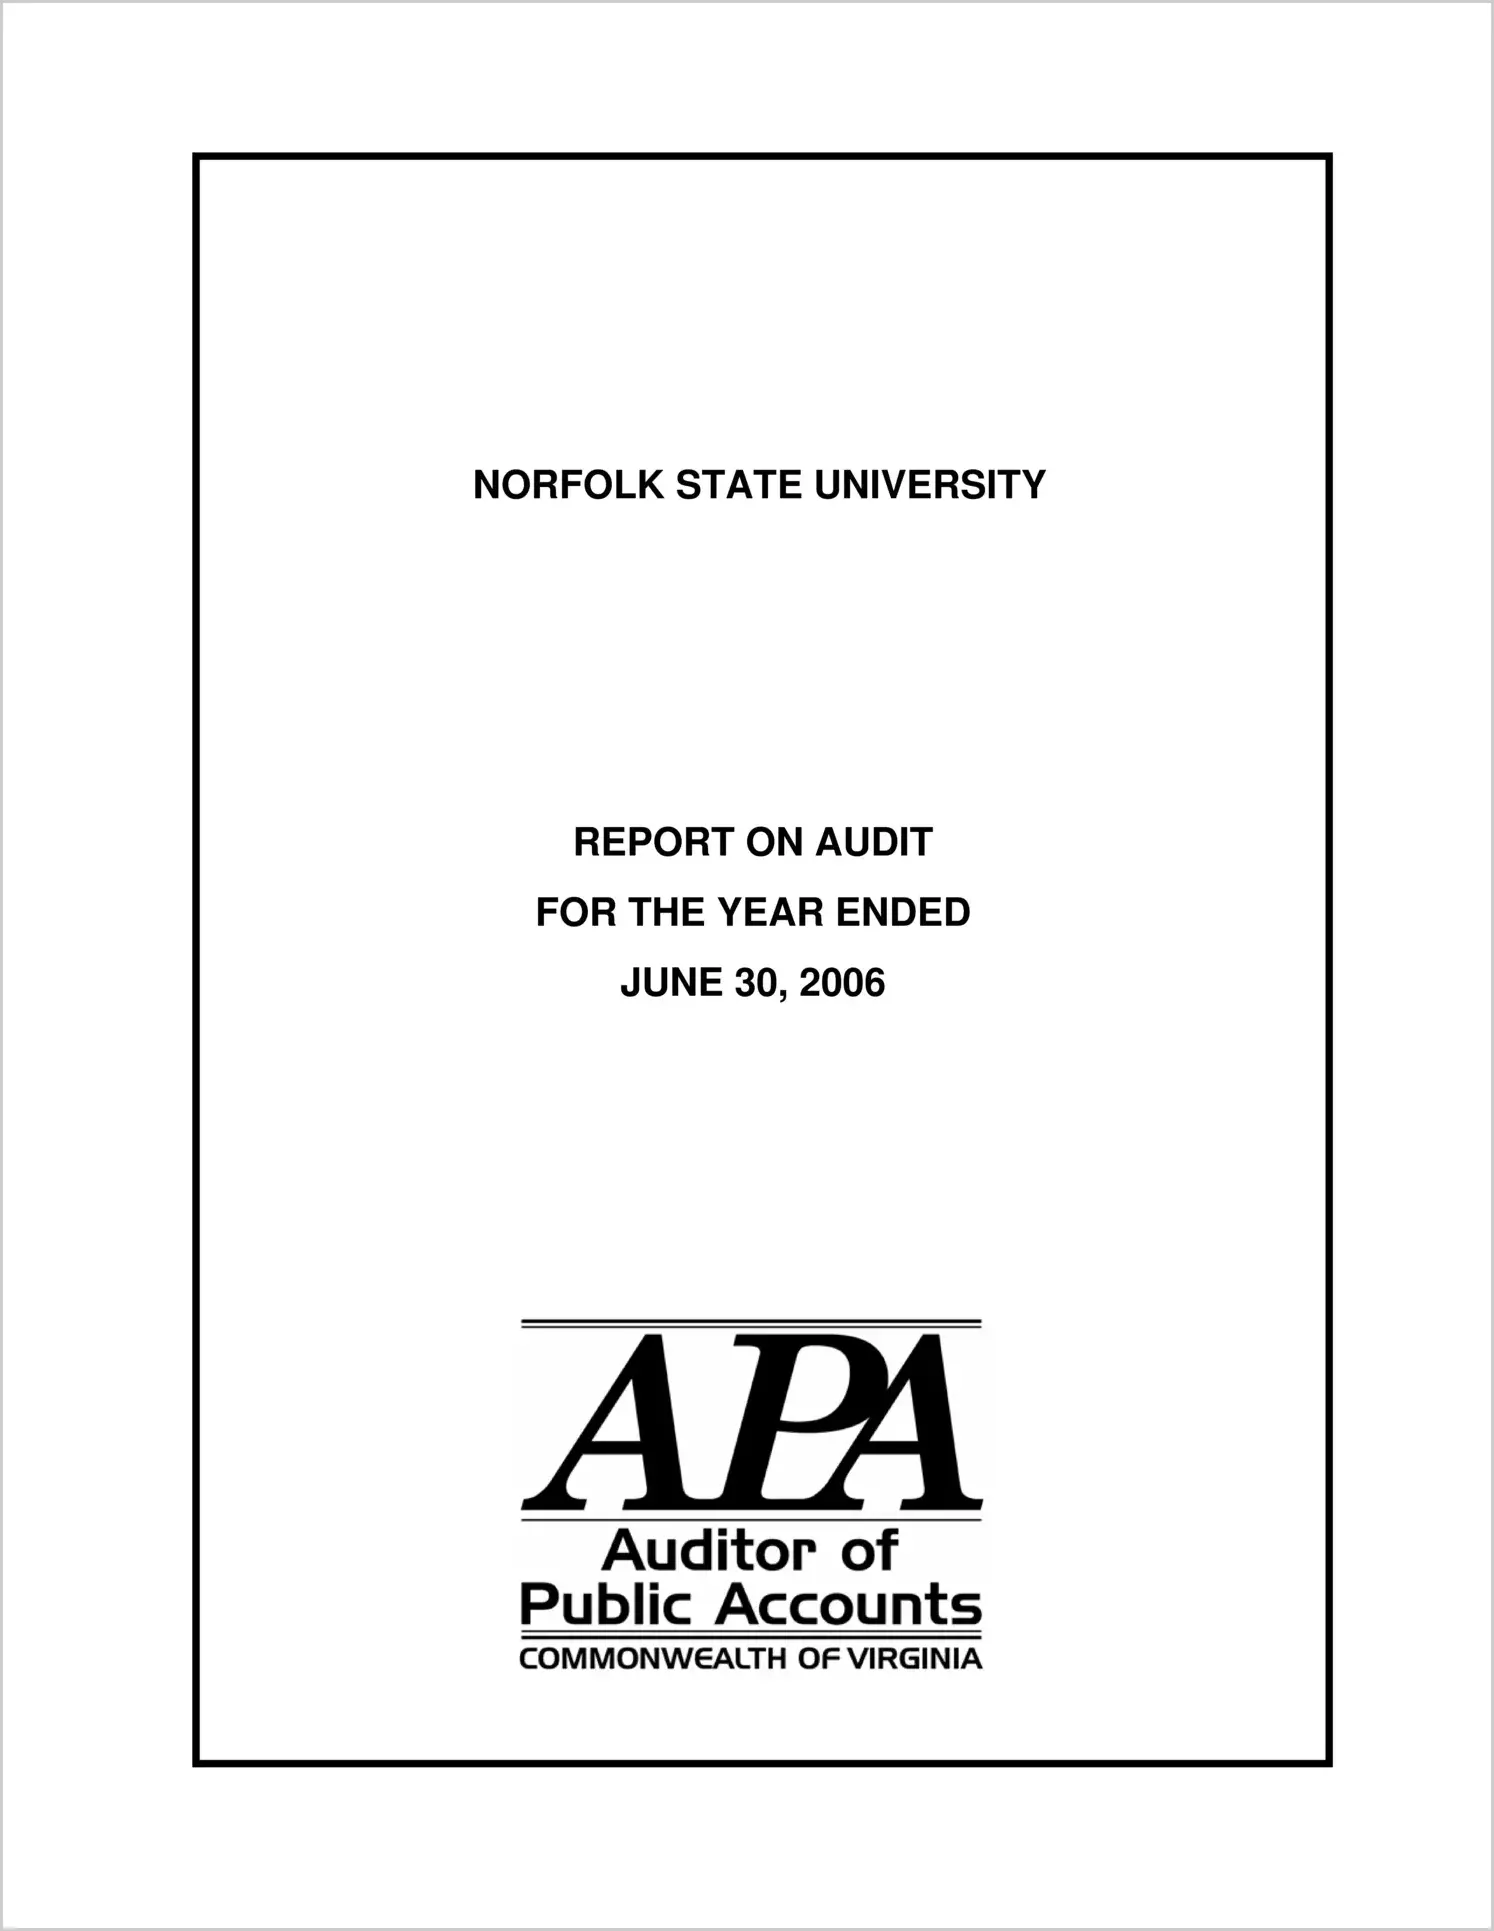 Norfolk State University for the year ended June 30, 2006